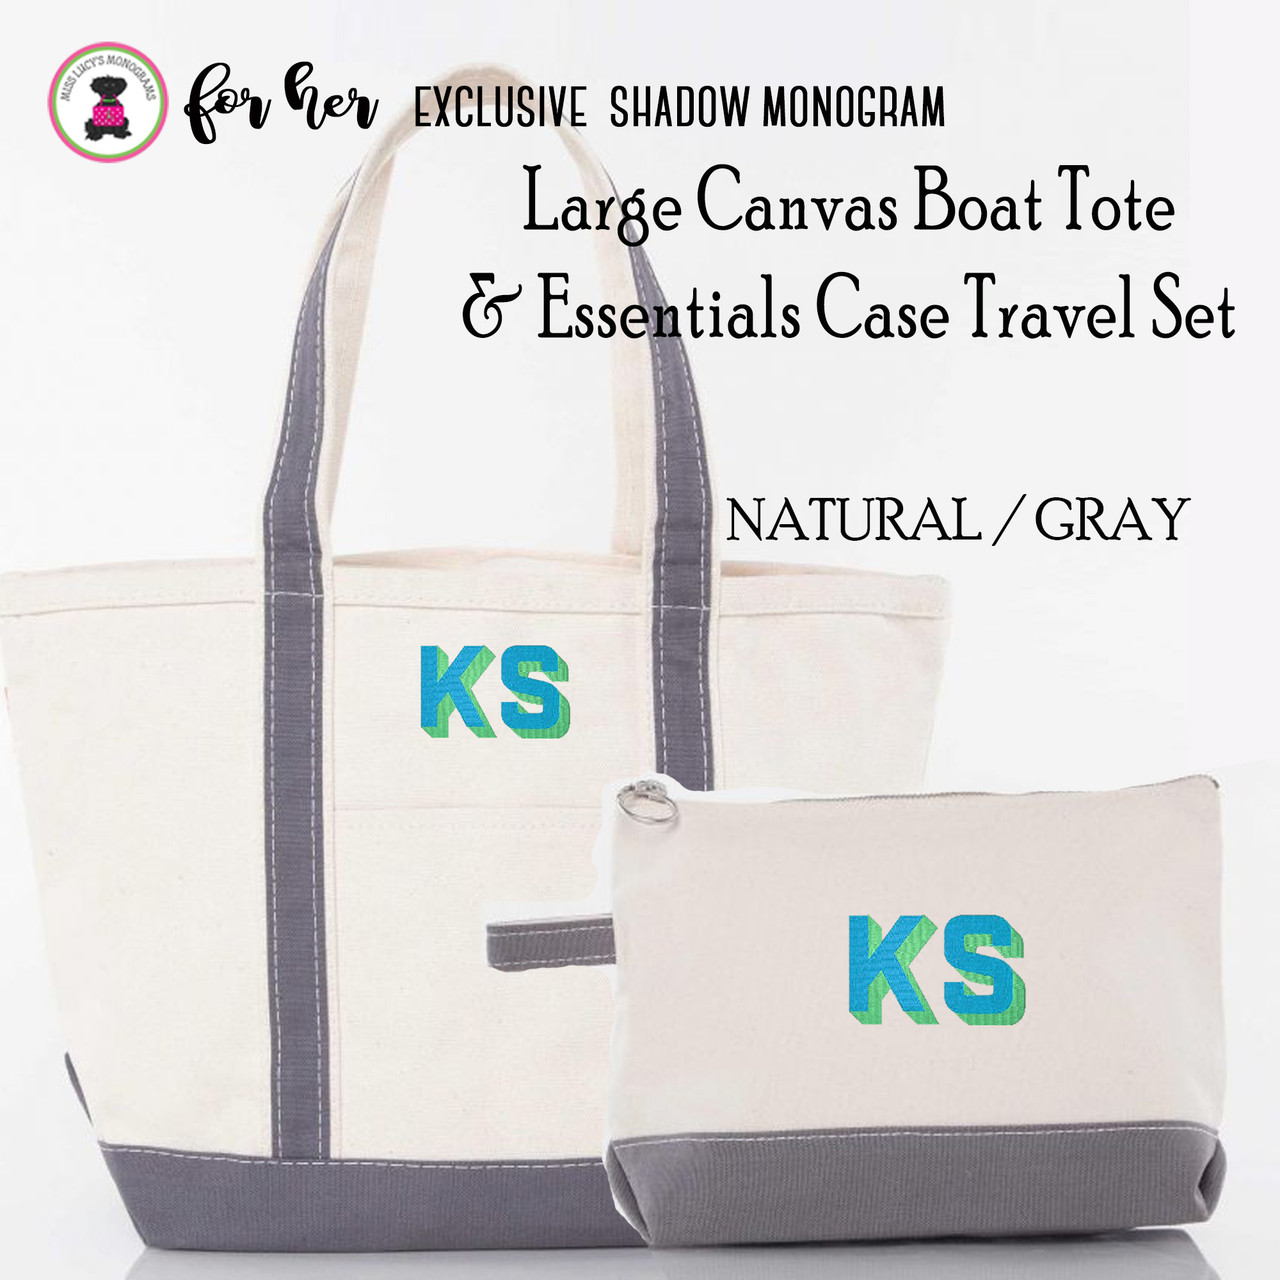 Large GRAY Boat Tote & Essentials Case Travel Set w Shadow